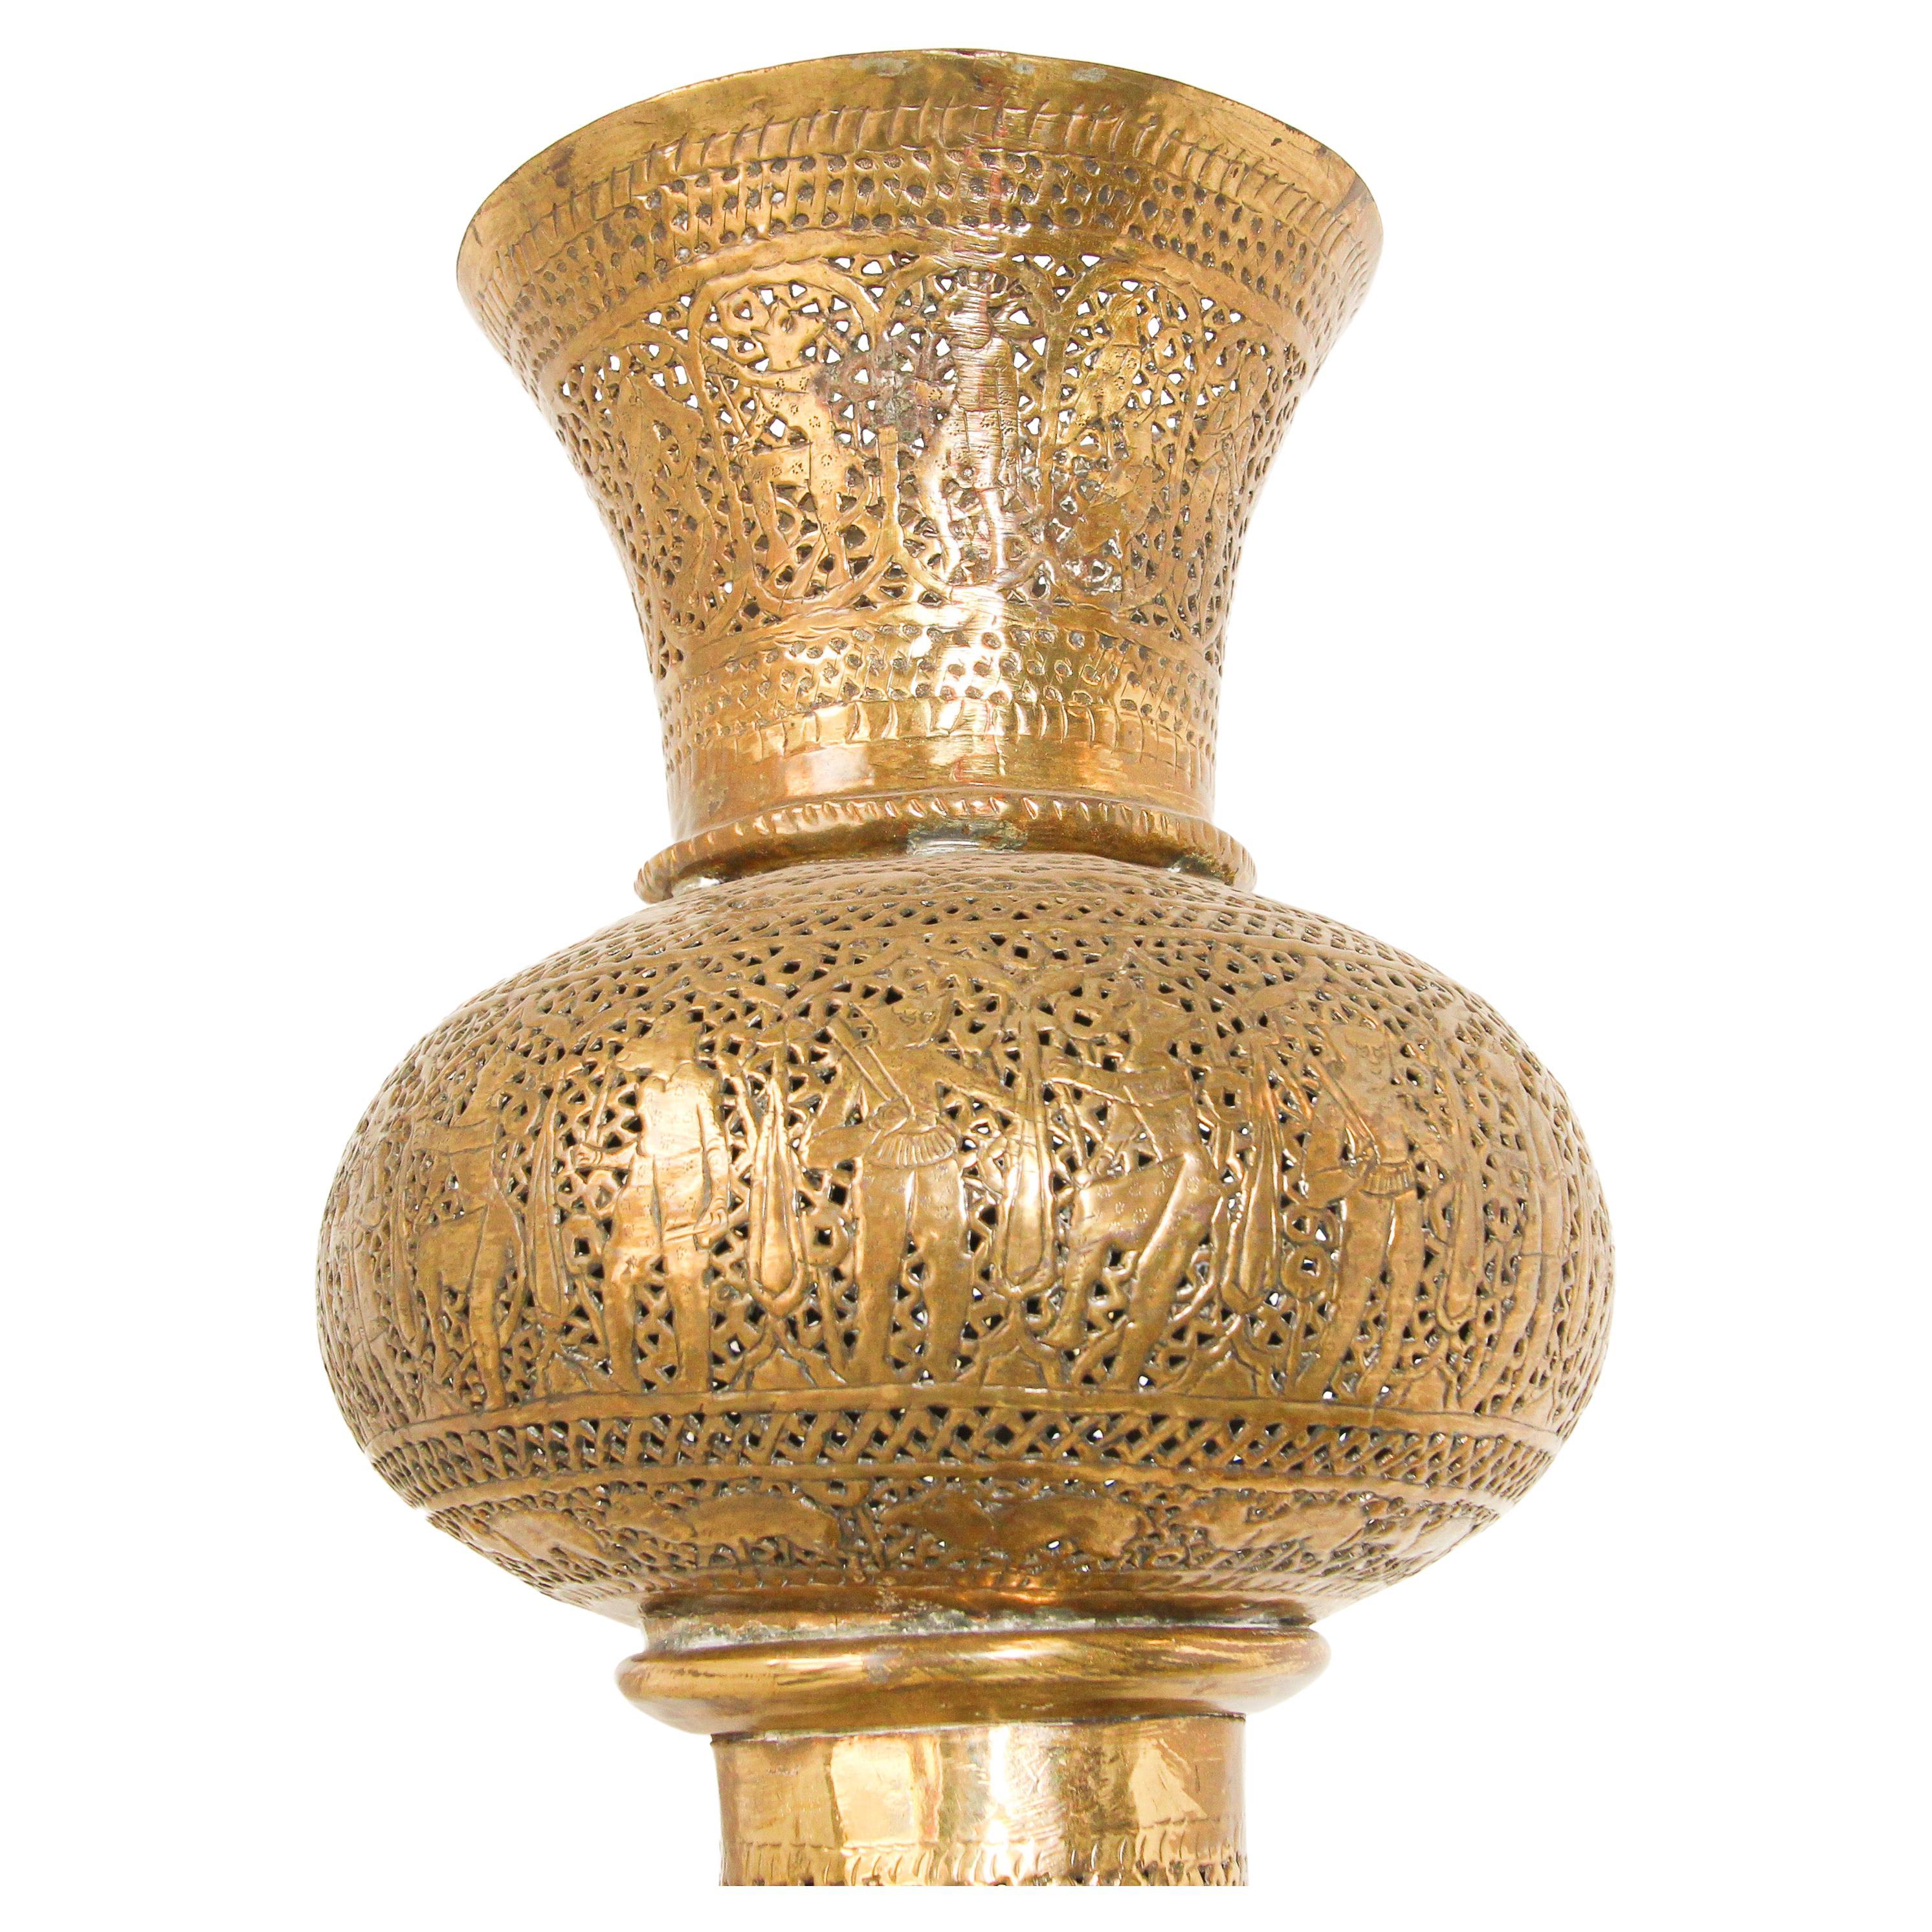 Extremely fine antique Islamic floor brass lamp with Kufic Mamluke revival pierced foliate openwork’s chased and chiselled with arabic calligraphy and figures.
Antique 19th century Middle Eastern Egyptian floor decorative candle lamp,
Rising from